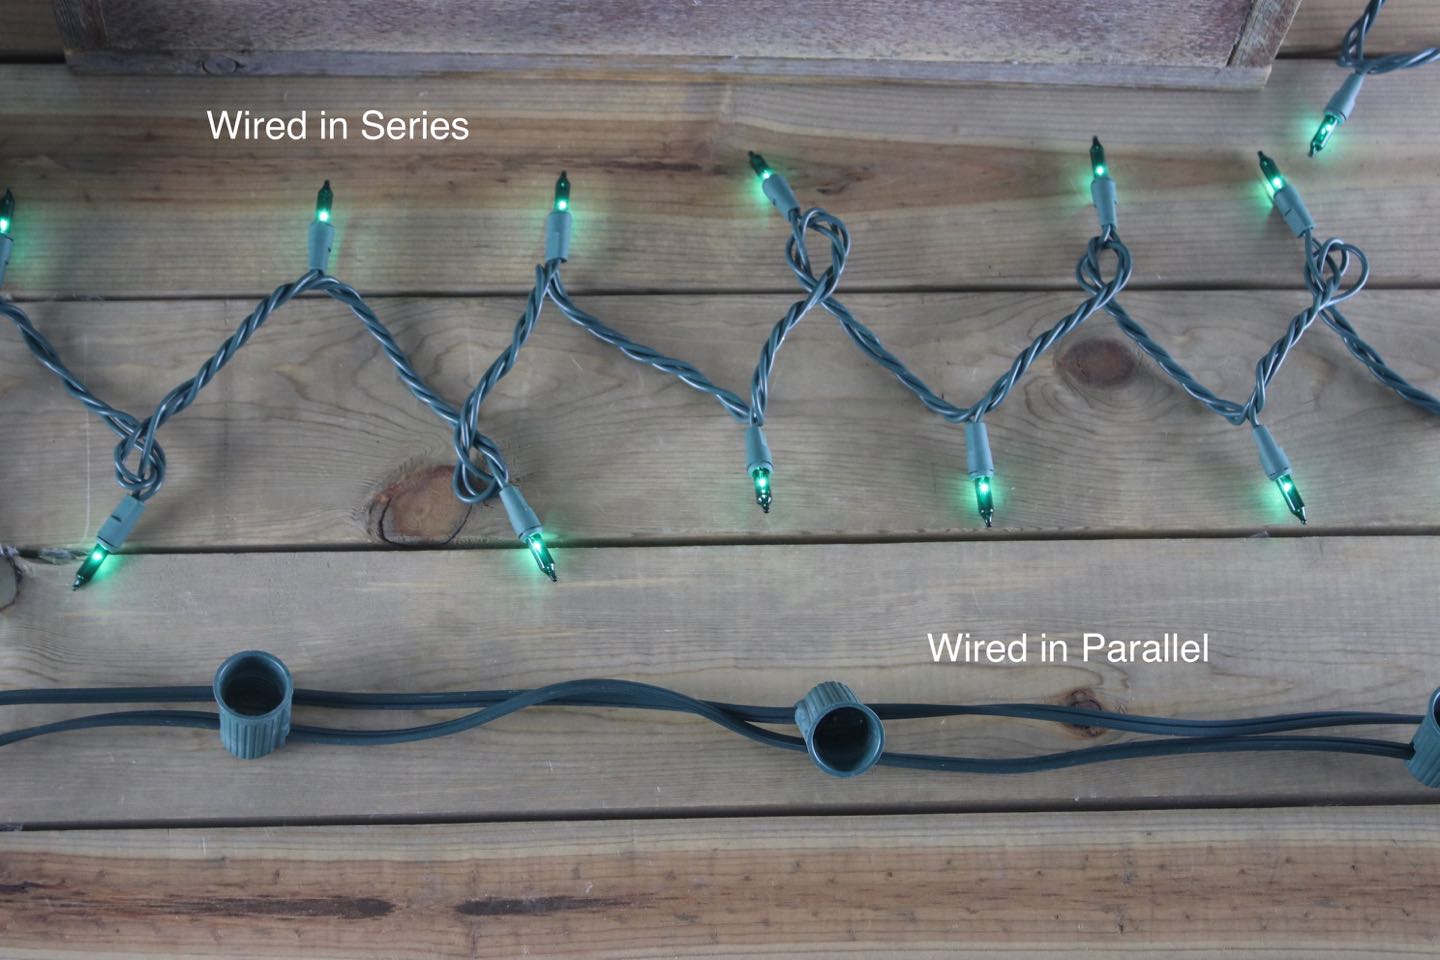 Christmas Lights In Series Or Parallel